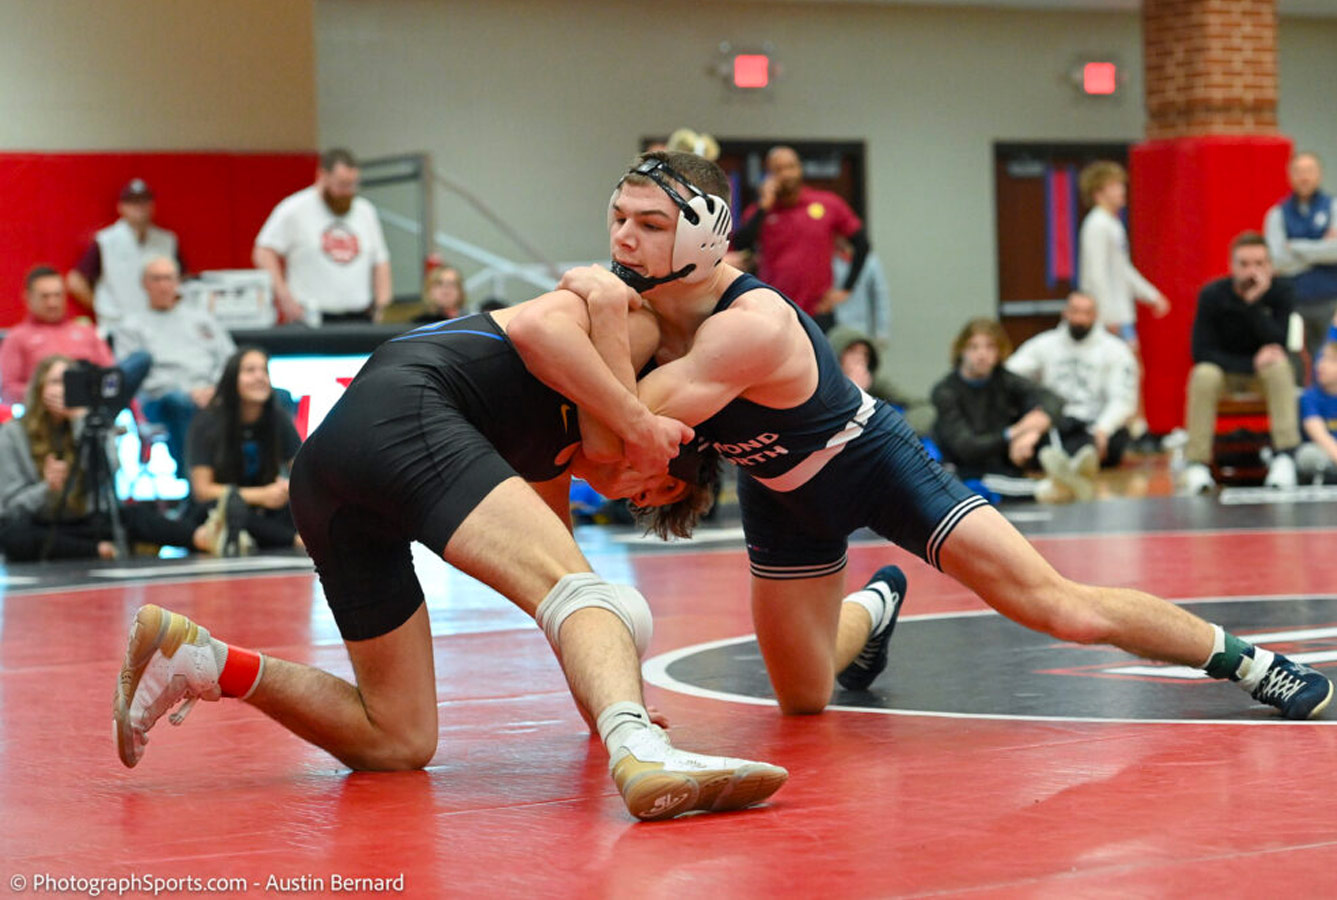 Oklahoma Results from NHSCA Owrestle